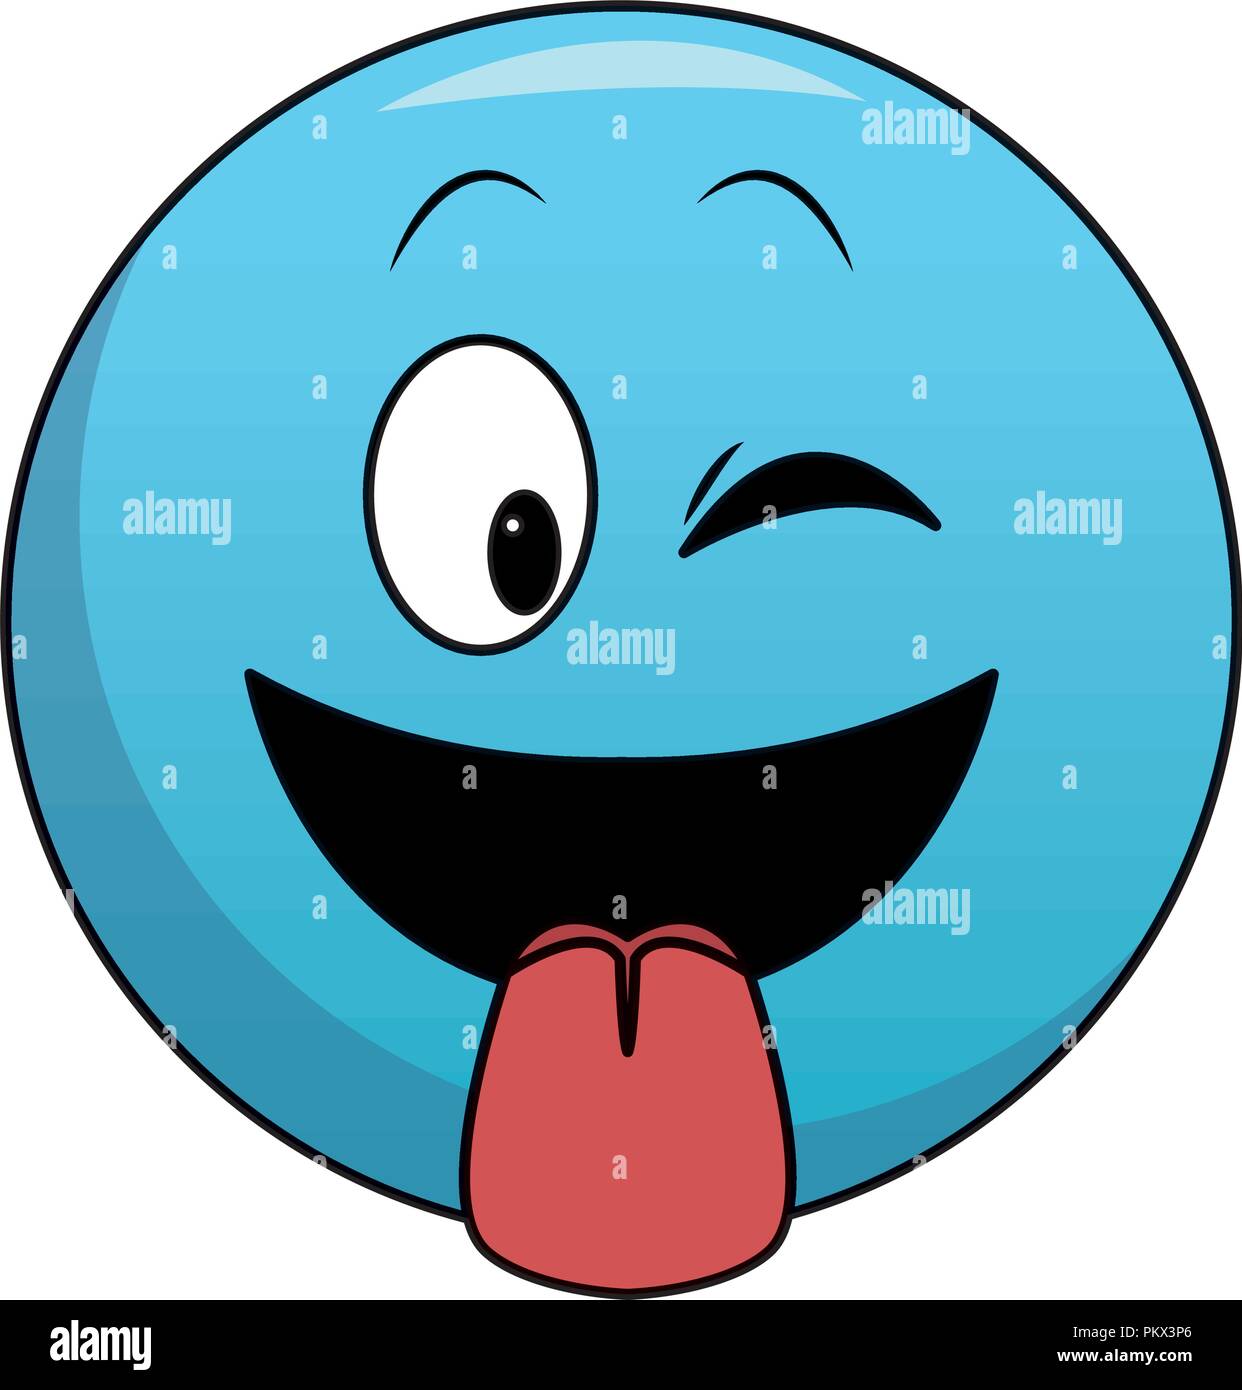 Tongue out chat emoticon Stock Vector